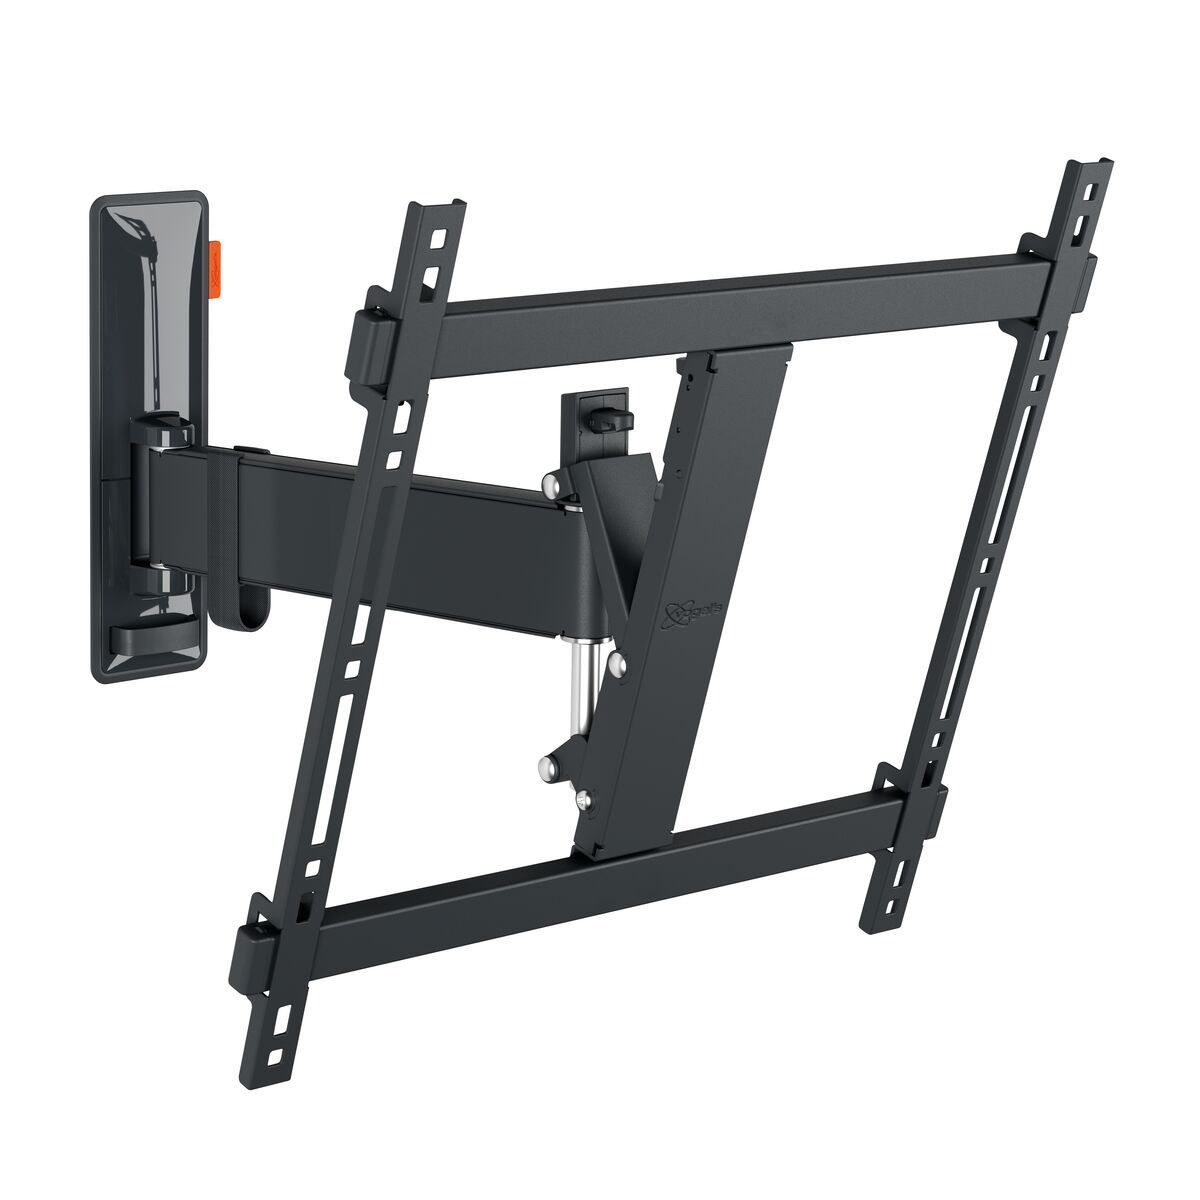 Vogel's TVM 3425 Full-Motion TV Wall Mount - Suitable for 32 up to 65 inch TVs - Motion (up to 120°) swivel - Tilt up to 20° - Product